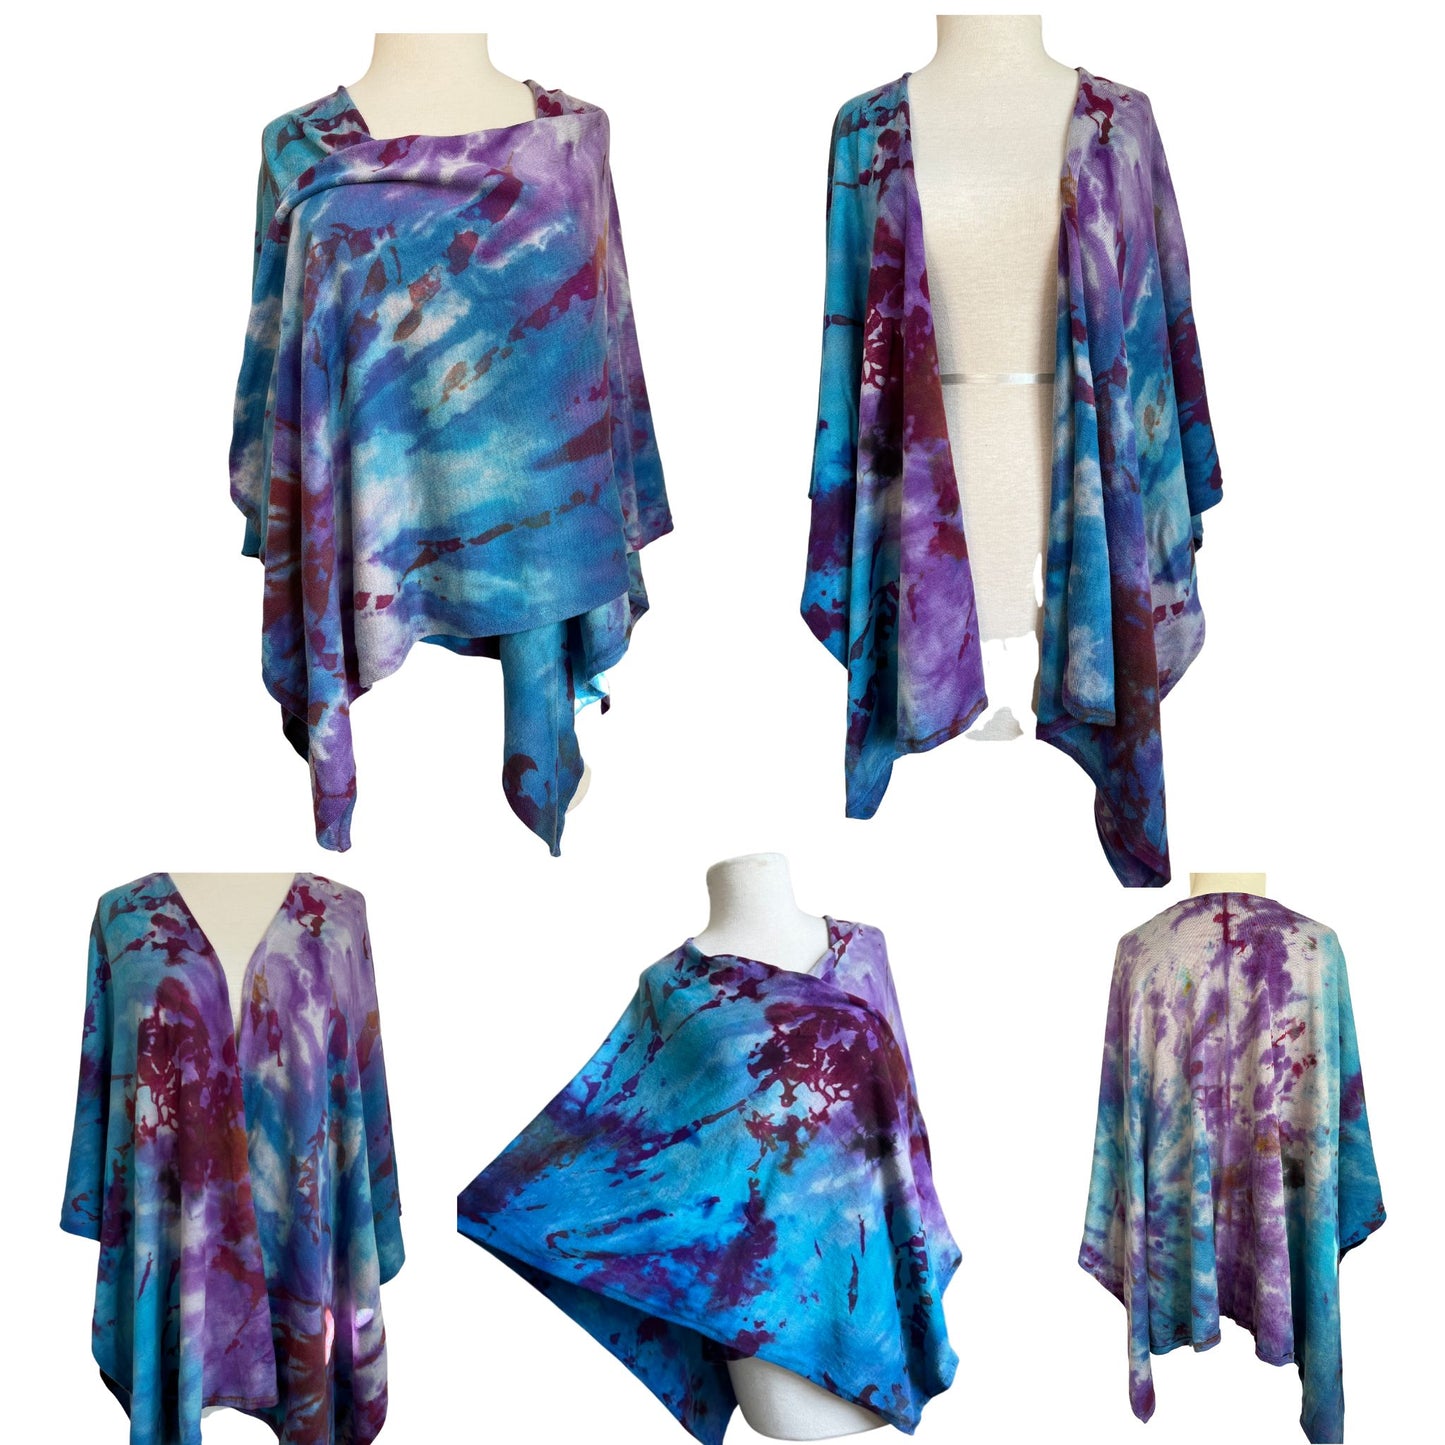 five images of a shawl style wrap that has been tie dyed with blues, purples, and burgandy colors